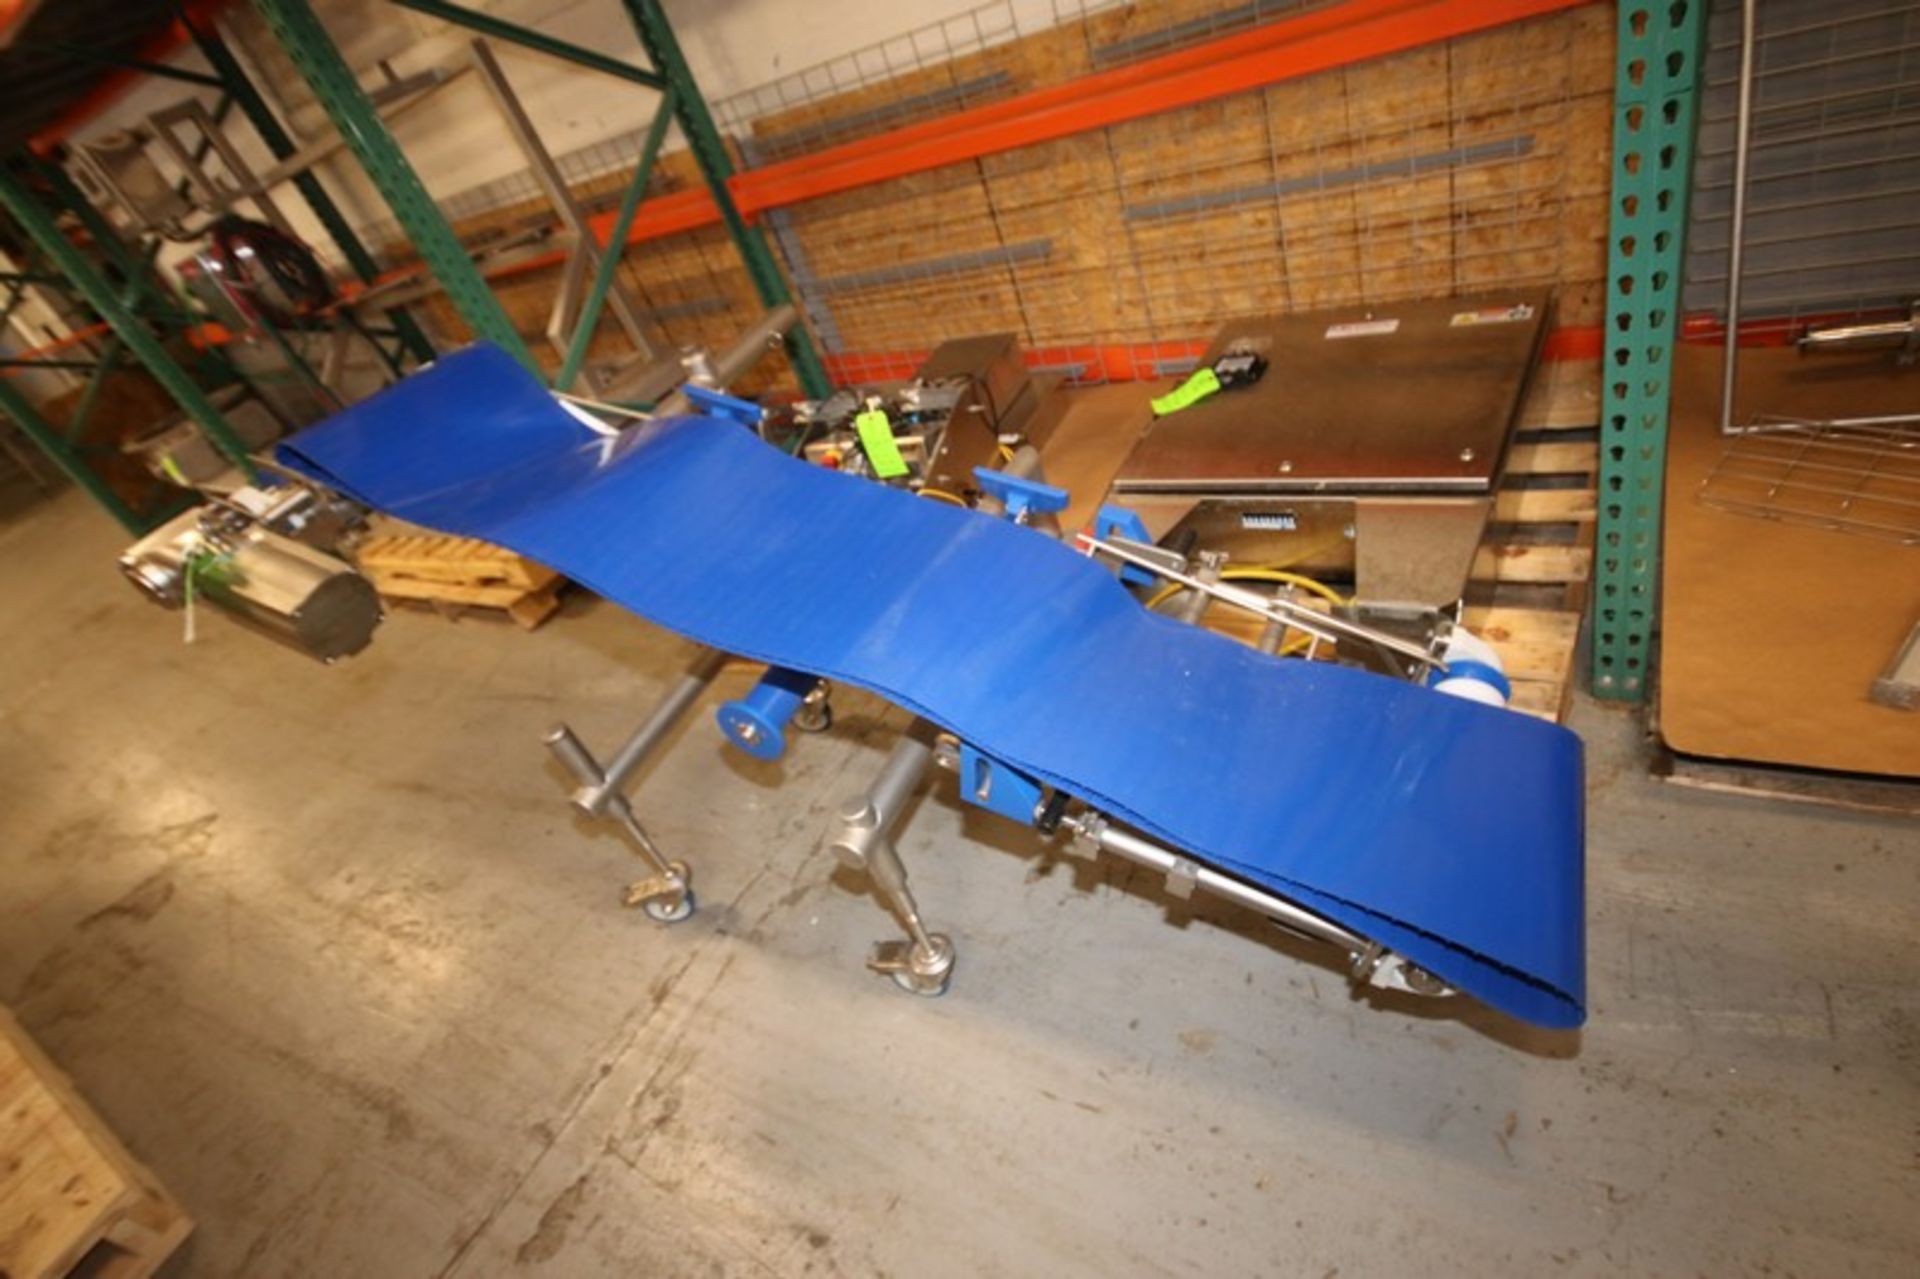 2019 Alimec Aprox. 78" L x 15.5" W x 15" to 41" S/S Inclined Belt Conveyor, with Bauer S/S Drive - Image 2 of 2